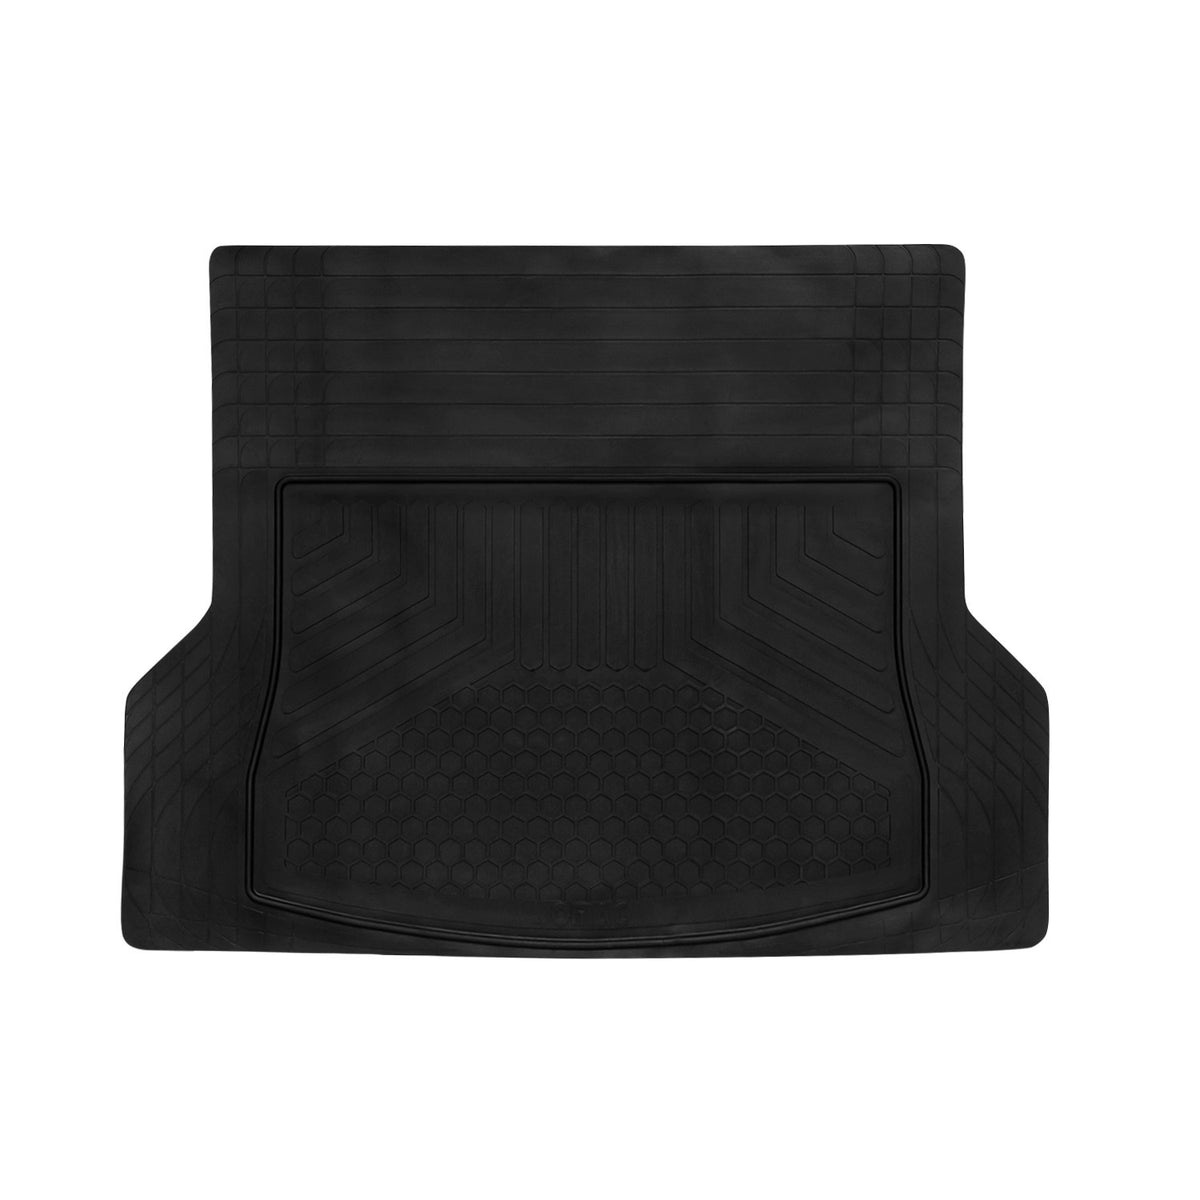 Boot liner anti-slip mat boot liner trimmable for Mazda 5 6 rubber